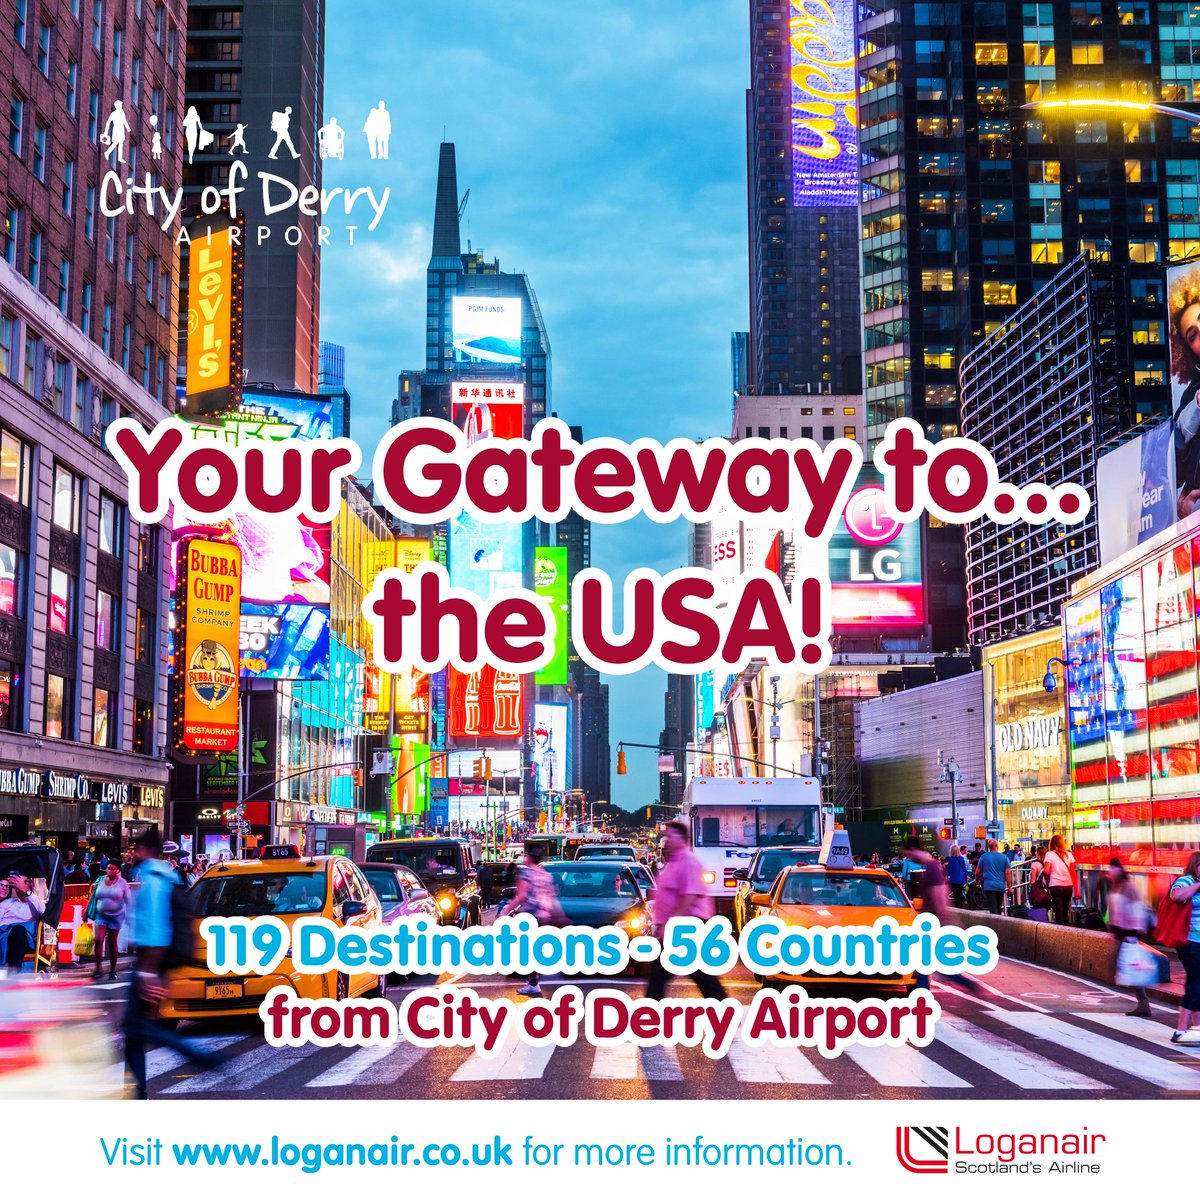 🇺🇸American Holidays🇺🇸

Package holidays to your dream American destinations are available to book now with @trvlsolutions.☎️02890455030

🗽NEW YORK
⭐LAS VEGAS 
🌉SAN FRANCISCO
🏛️WASHINGTON
🌴LOS ANGELES

Subject to availability. Atol 9078. ESTA required for entry into USA.